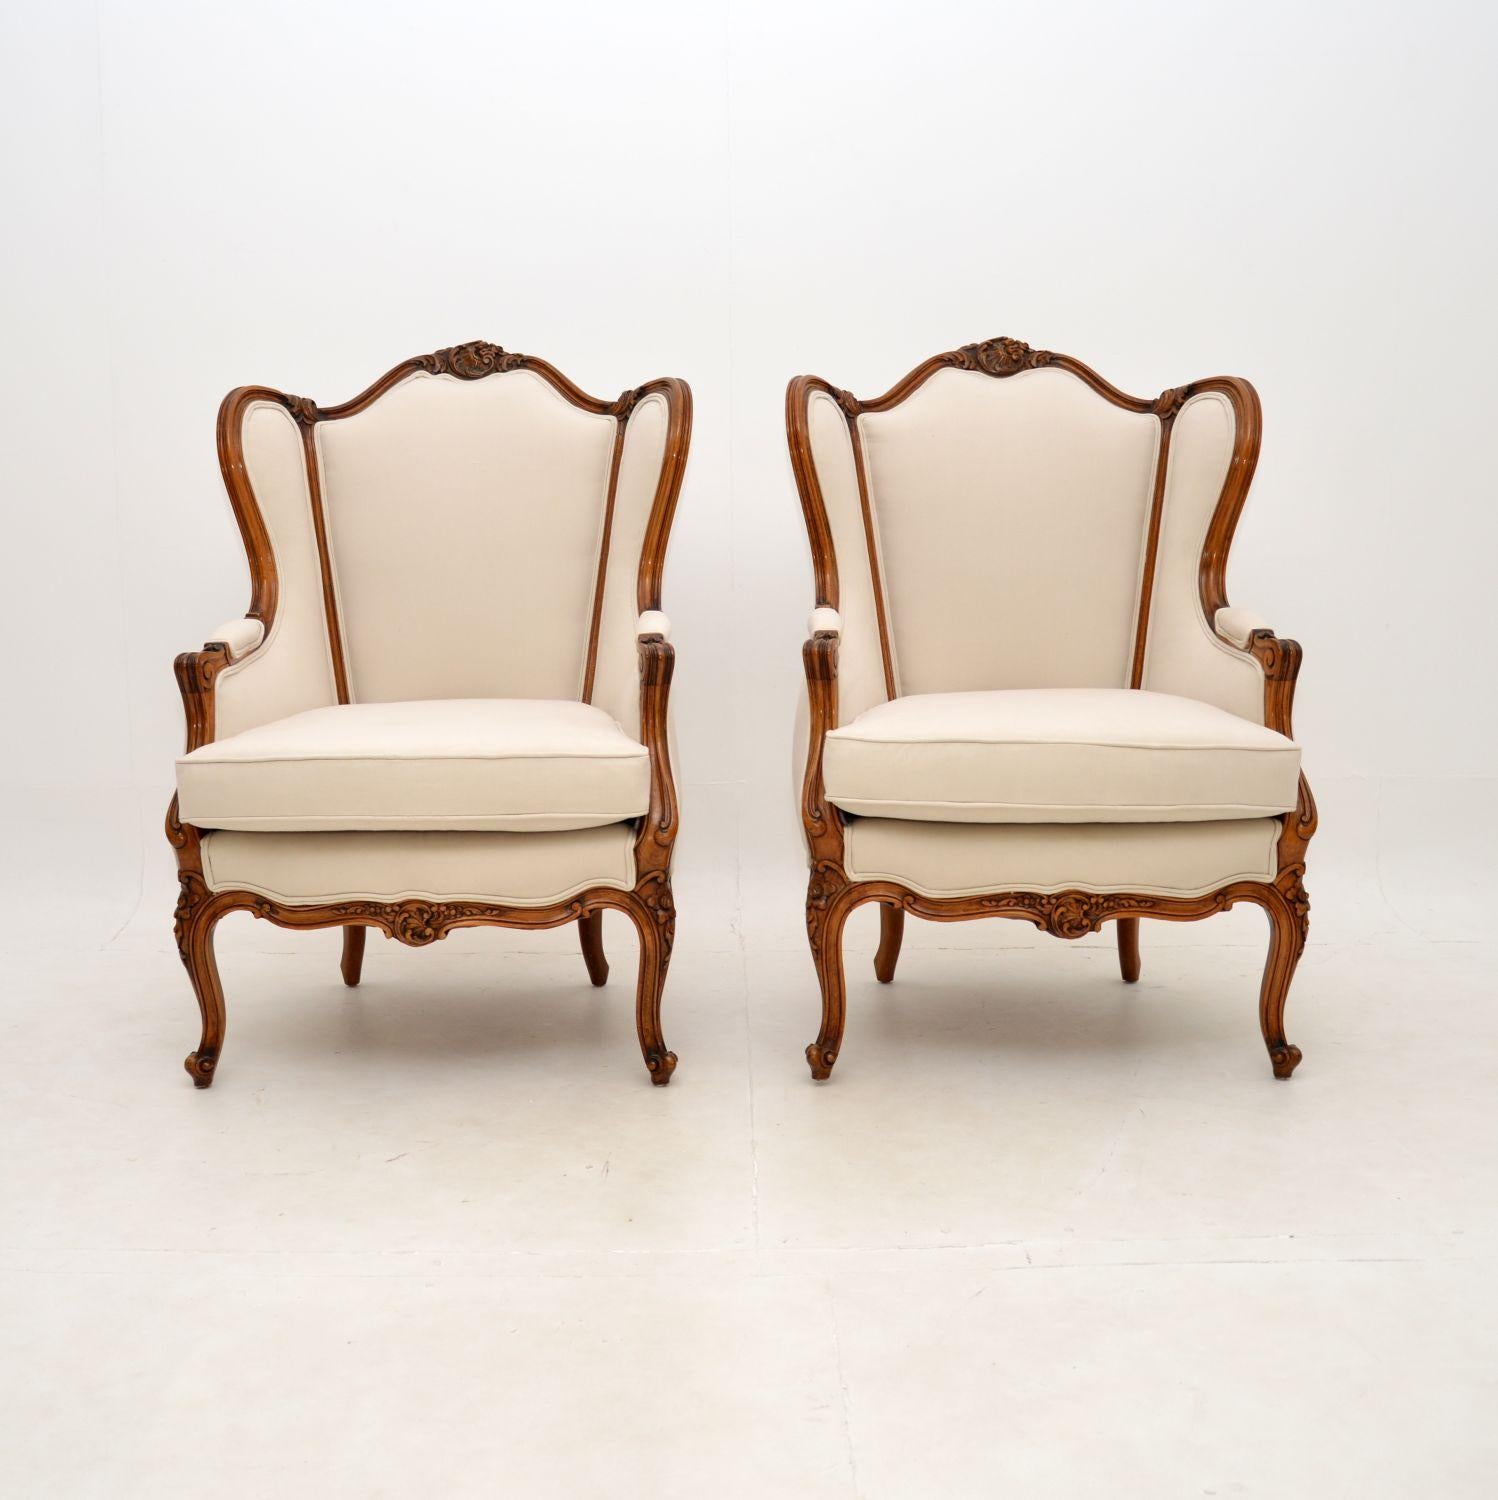 A stunning pair of antique French walnut armchairs. They were made in France and date from around the 1930’s.

The quality is outstanding, the solid walnut frames have beautifully crisp carving and a gorgeous shape. They are nicely designed, very